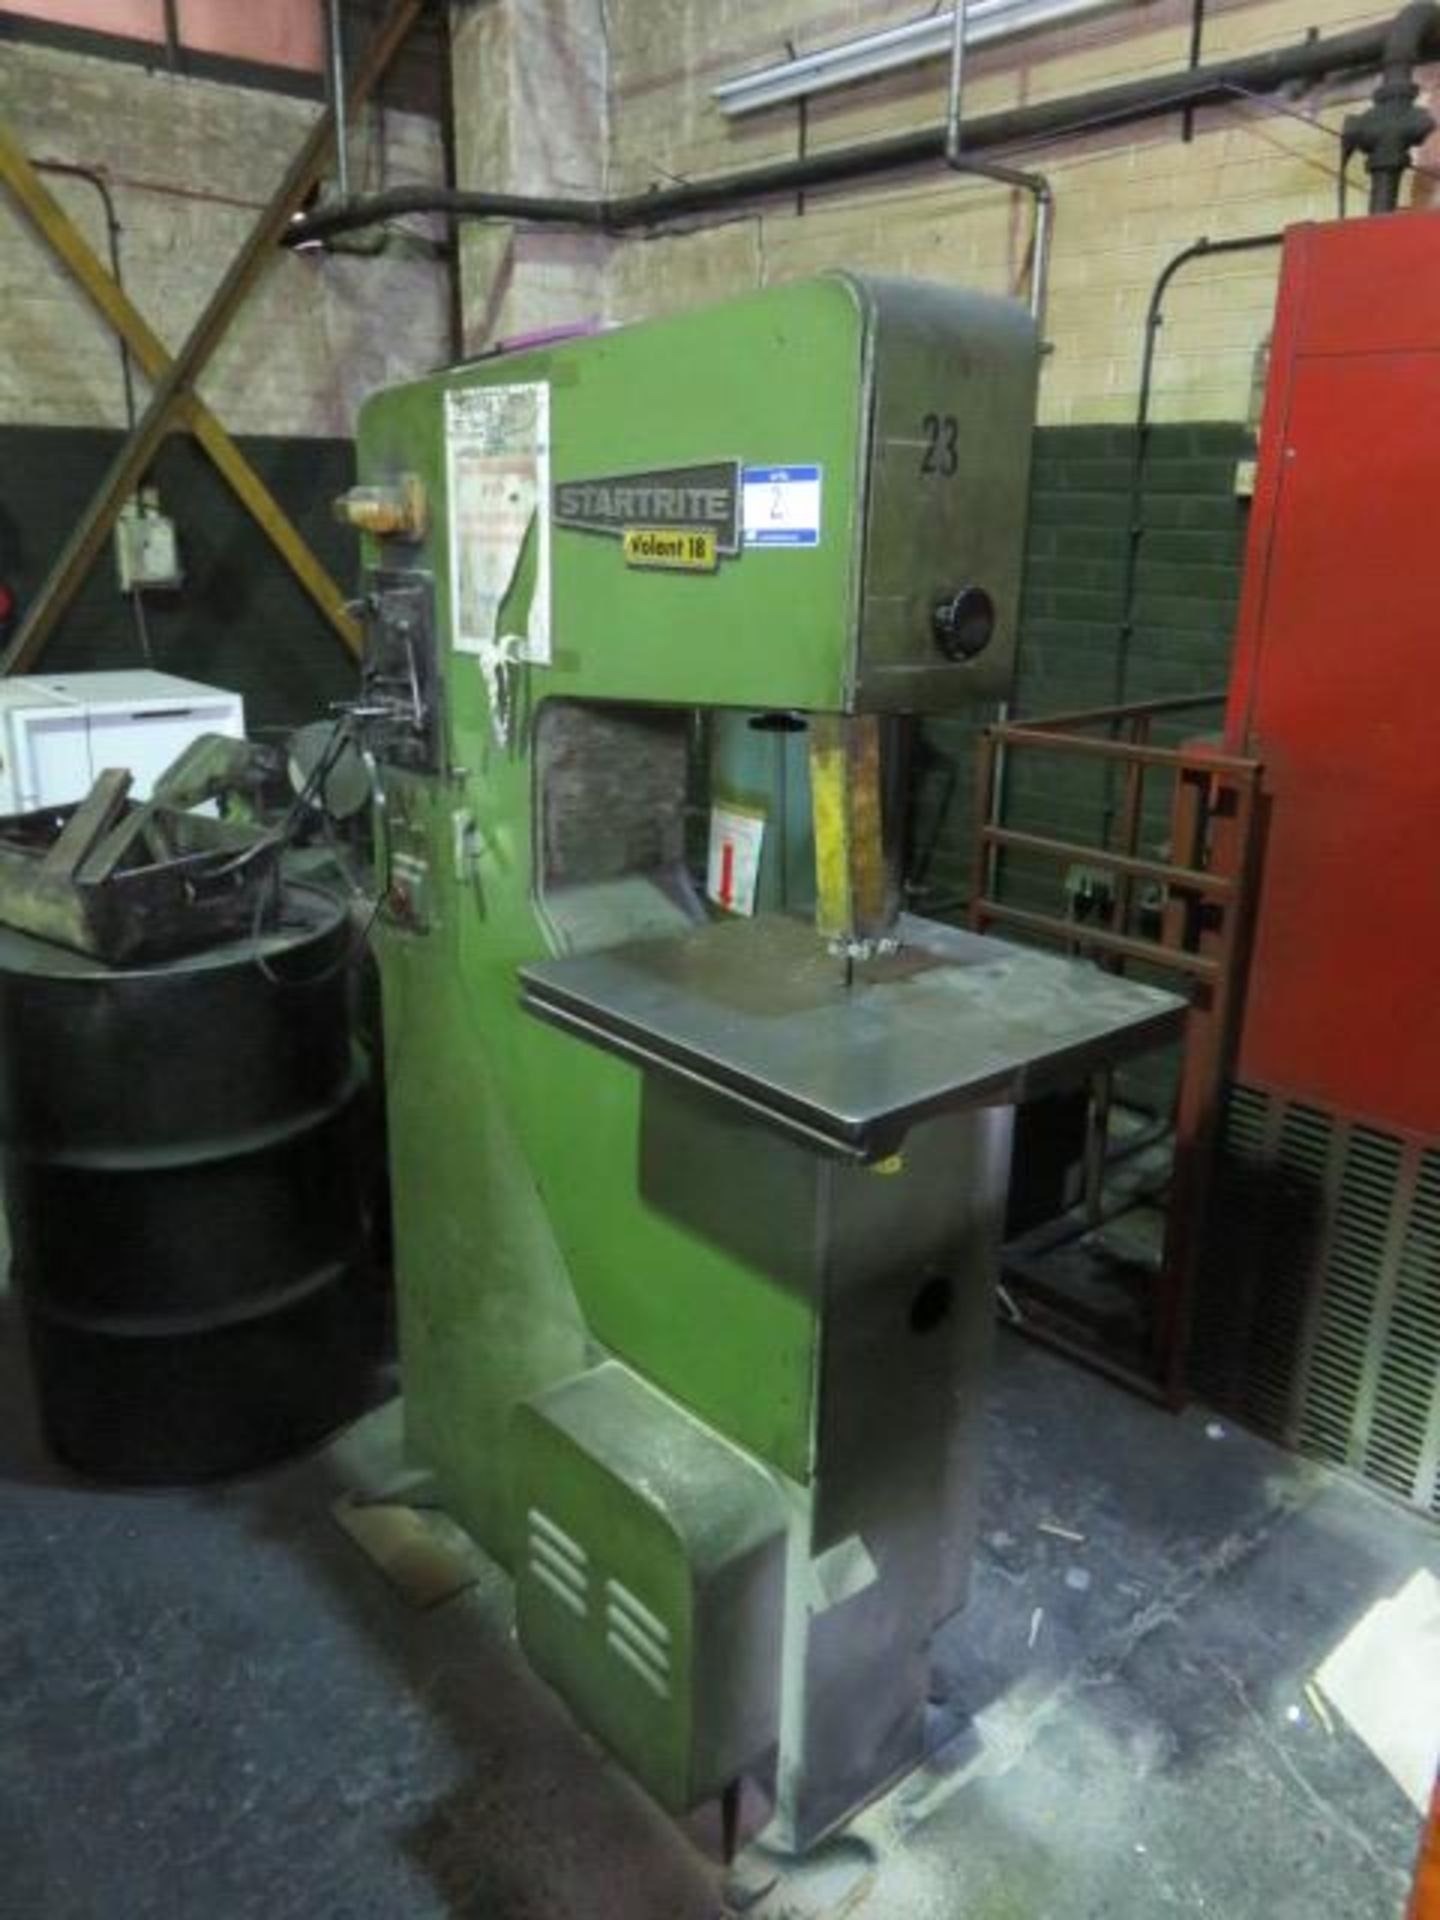 Startrite Volant 18 Vertical Bandsaw. Serial No. 17545(Full RAMS Documentation Required Prior to Rem